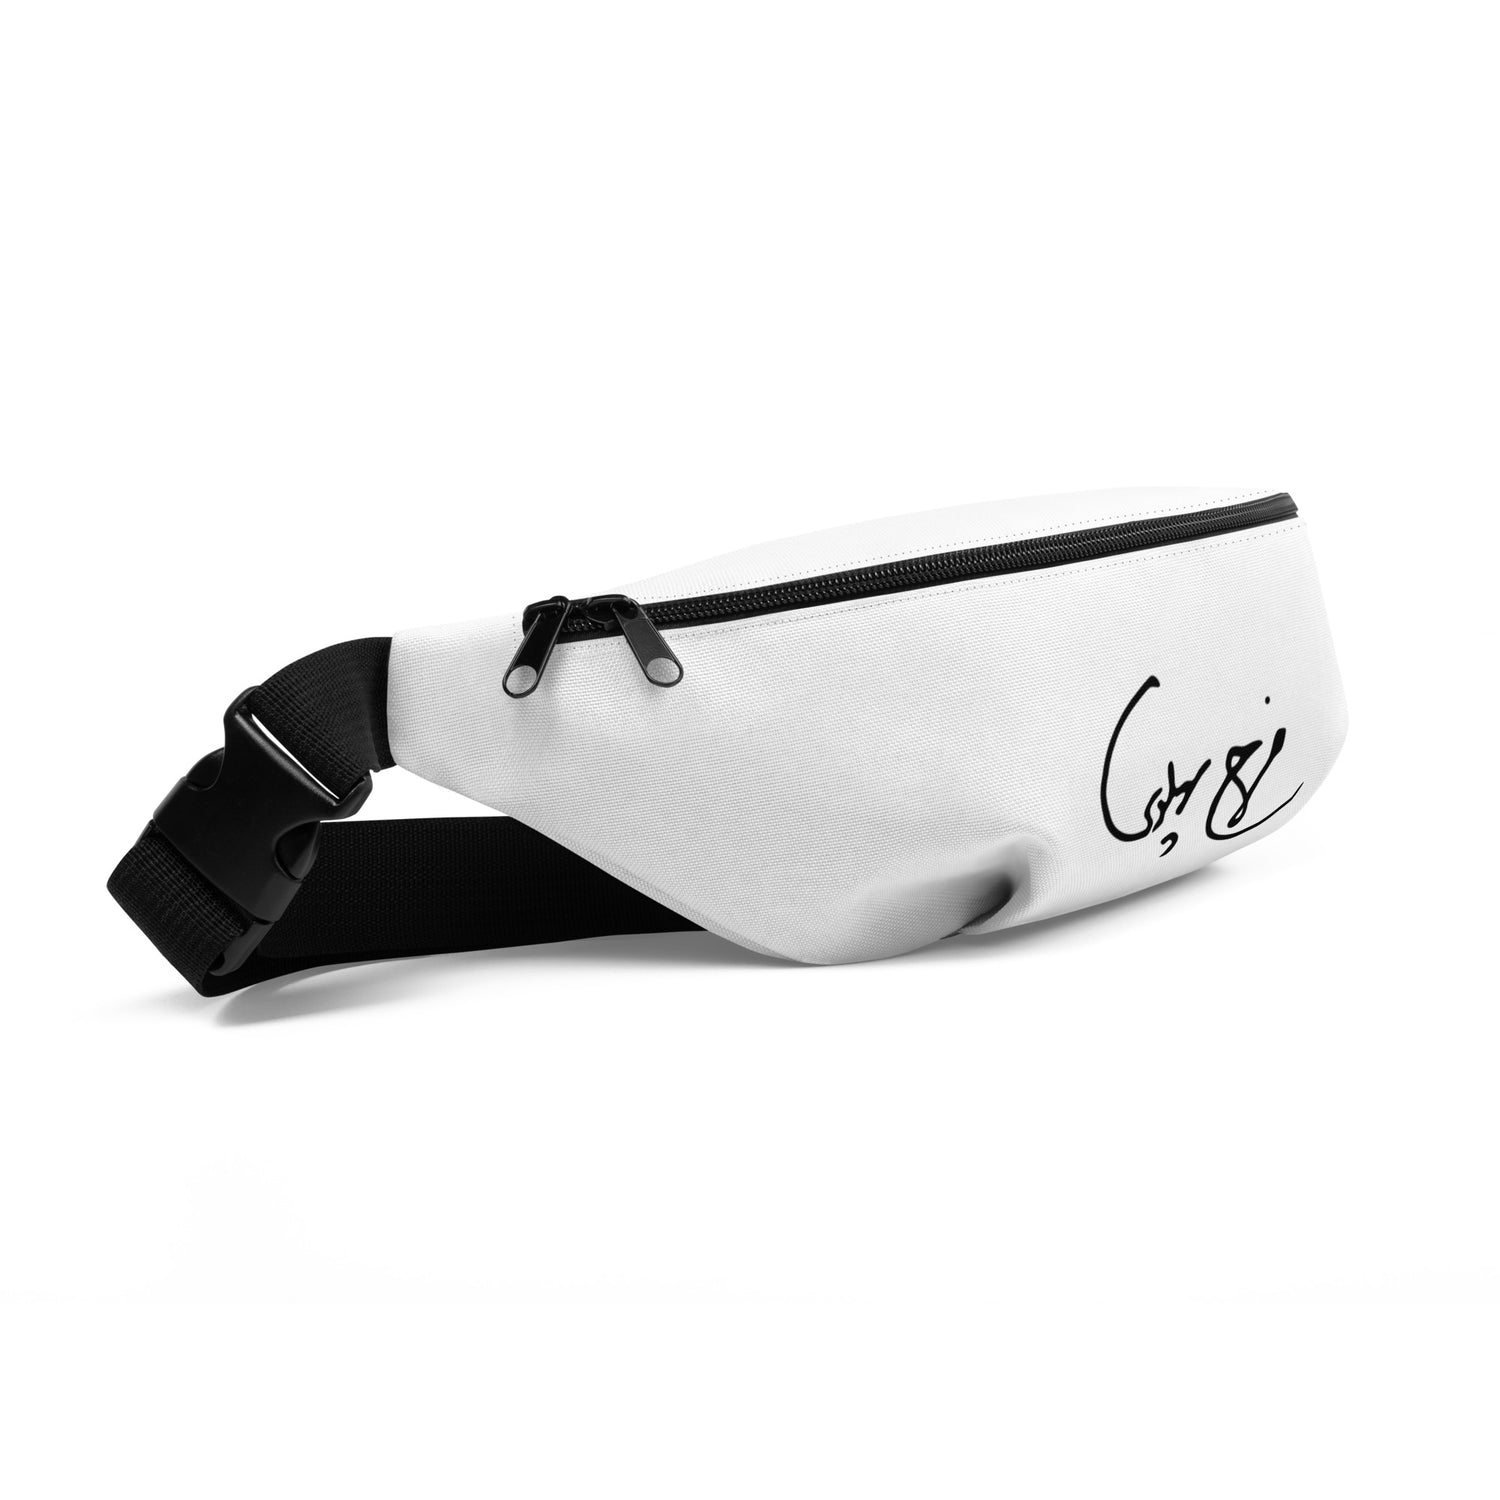 Fanny Pack - Persian Queen Signature: Stylish Convenience for Festivals and Travel